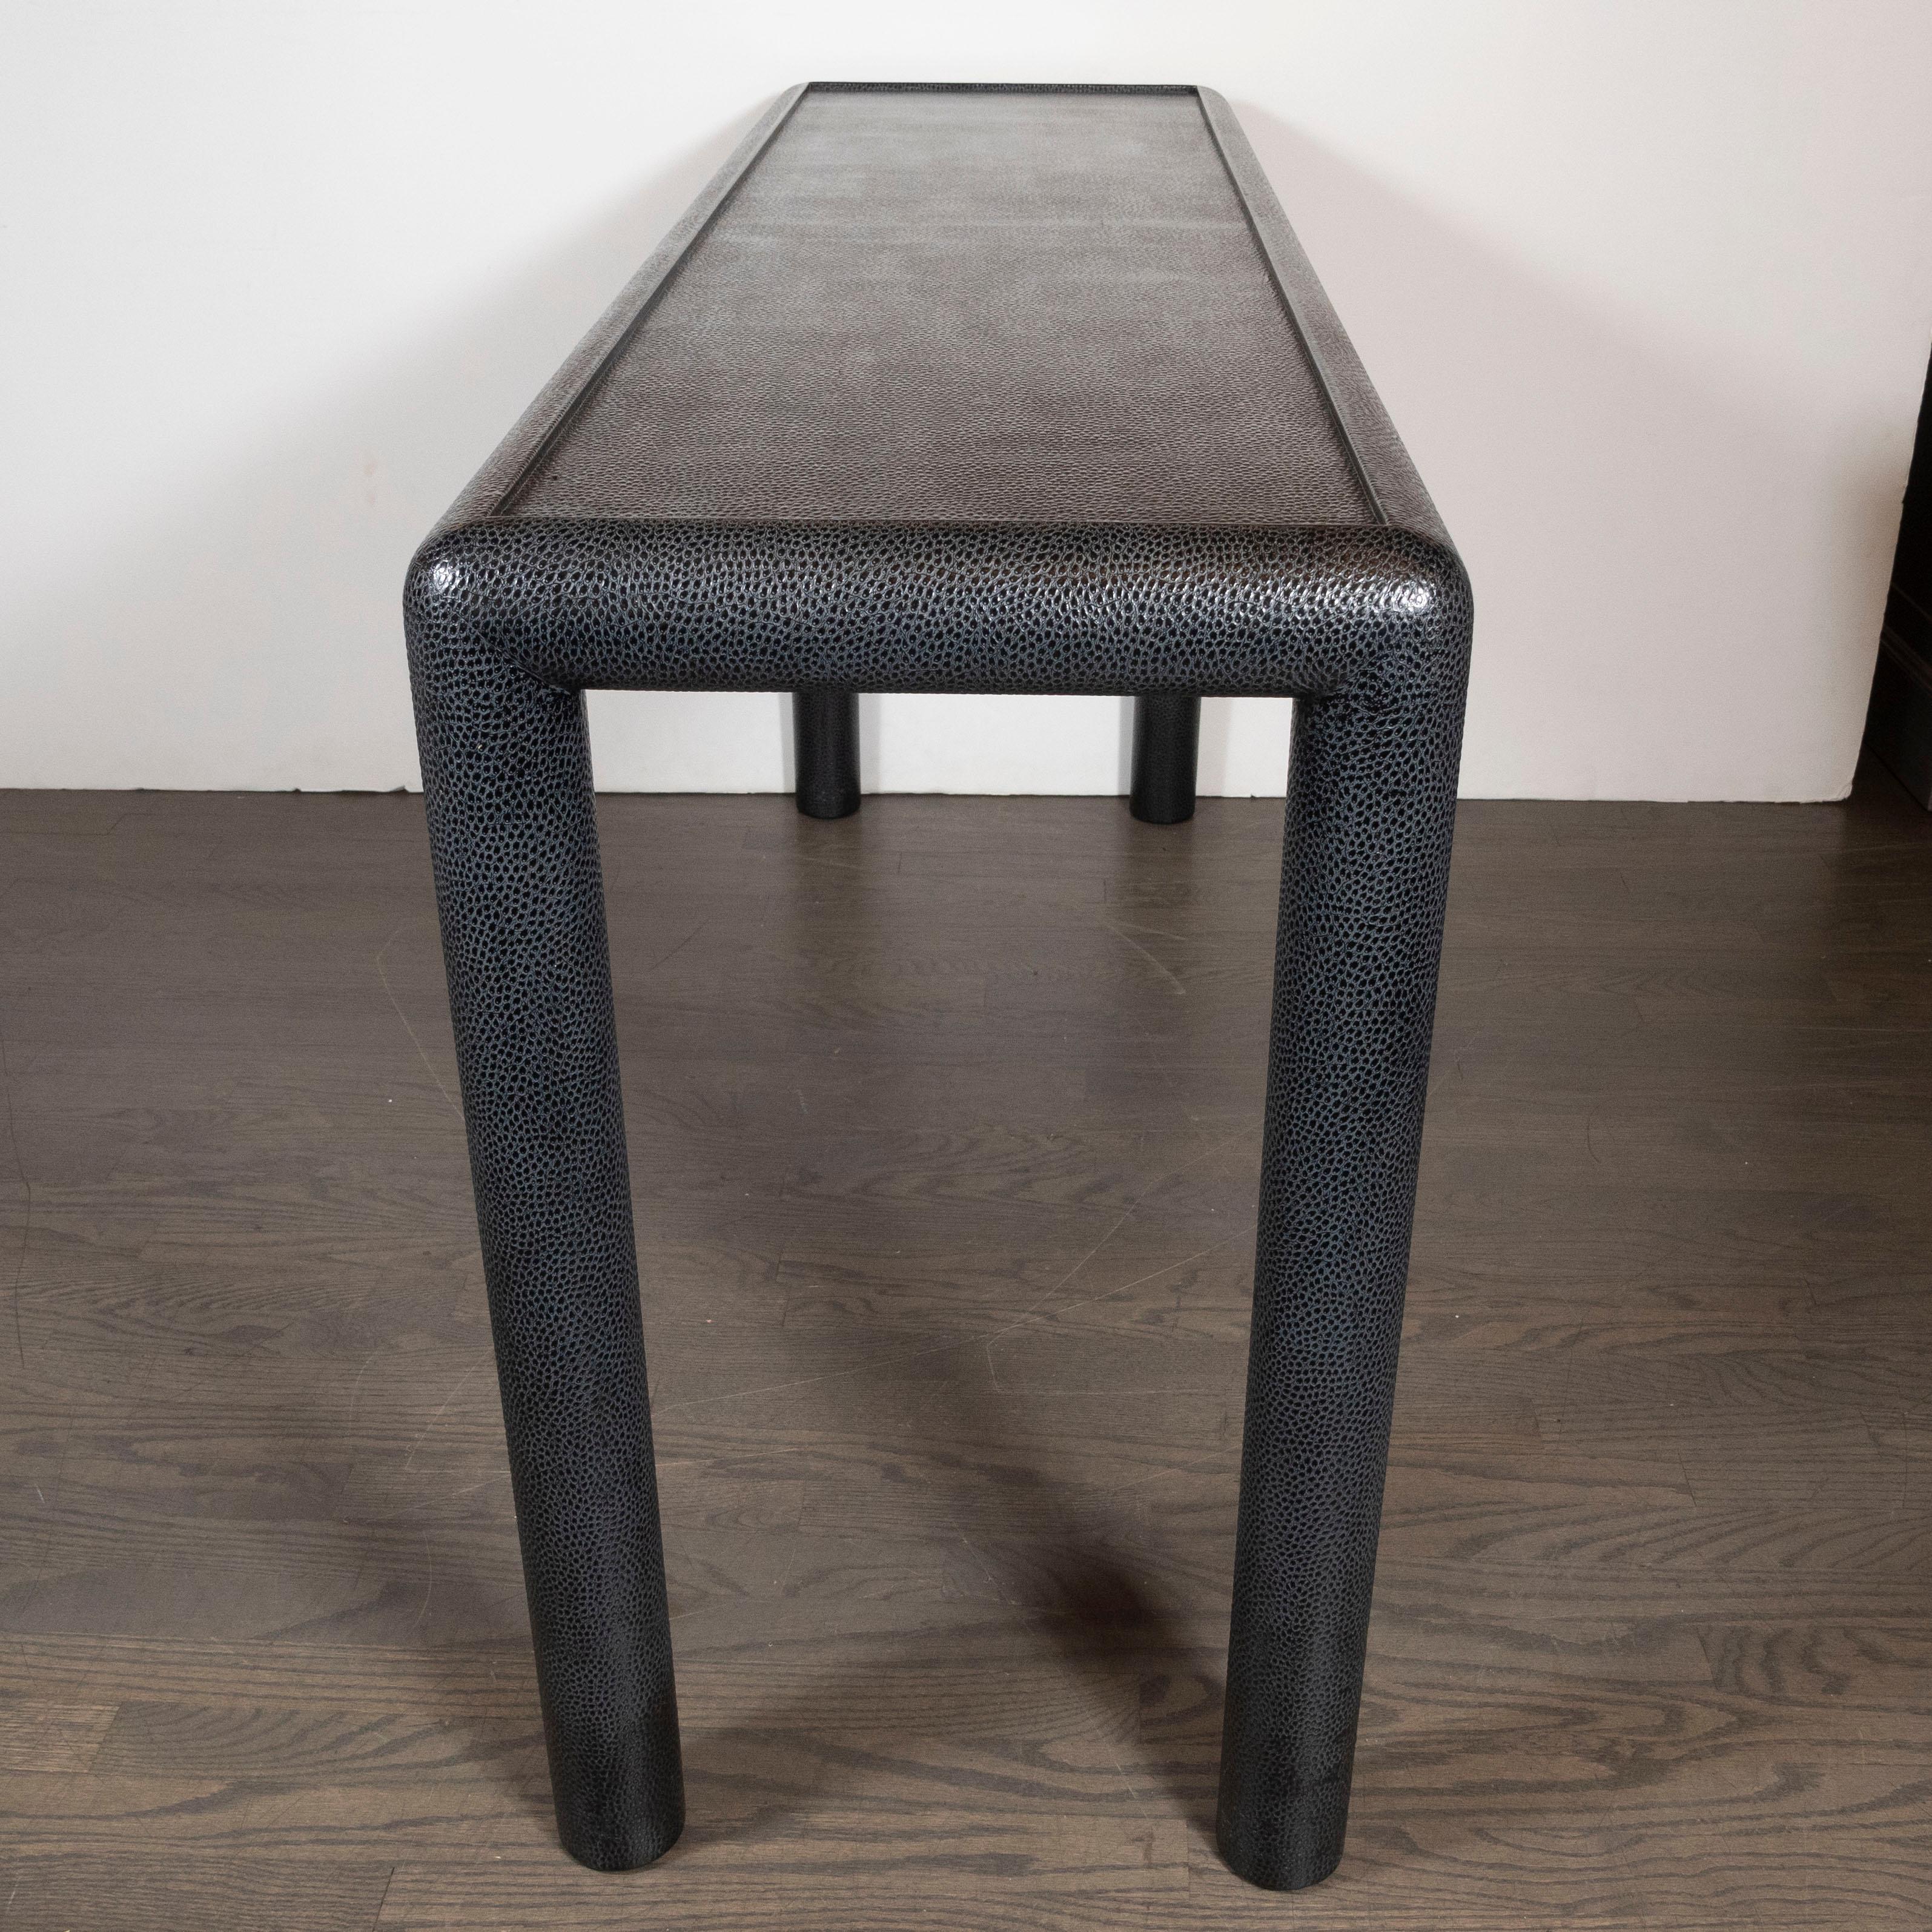 Late 20th Century Mid-Century Modern Black Ostrich Console Table Signed by Karl Springer